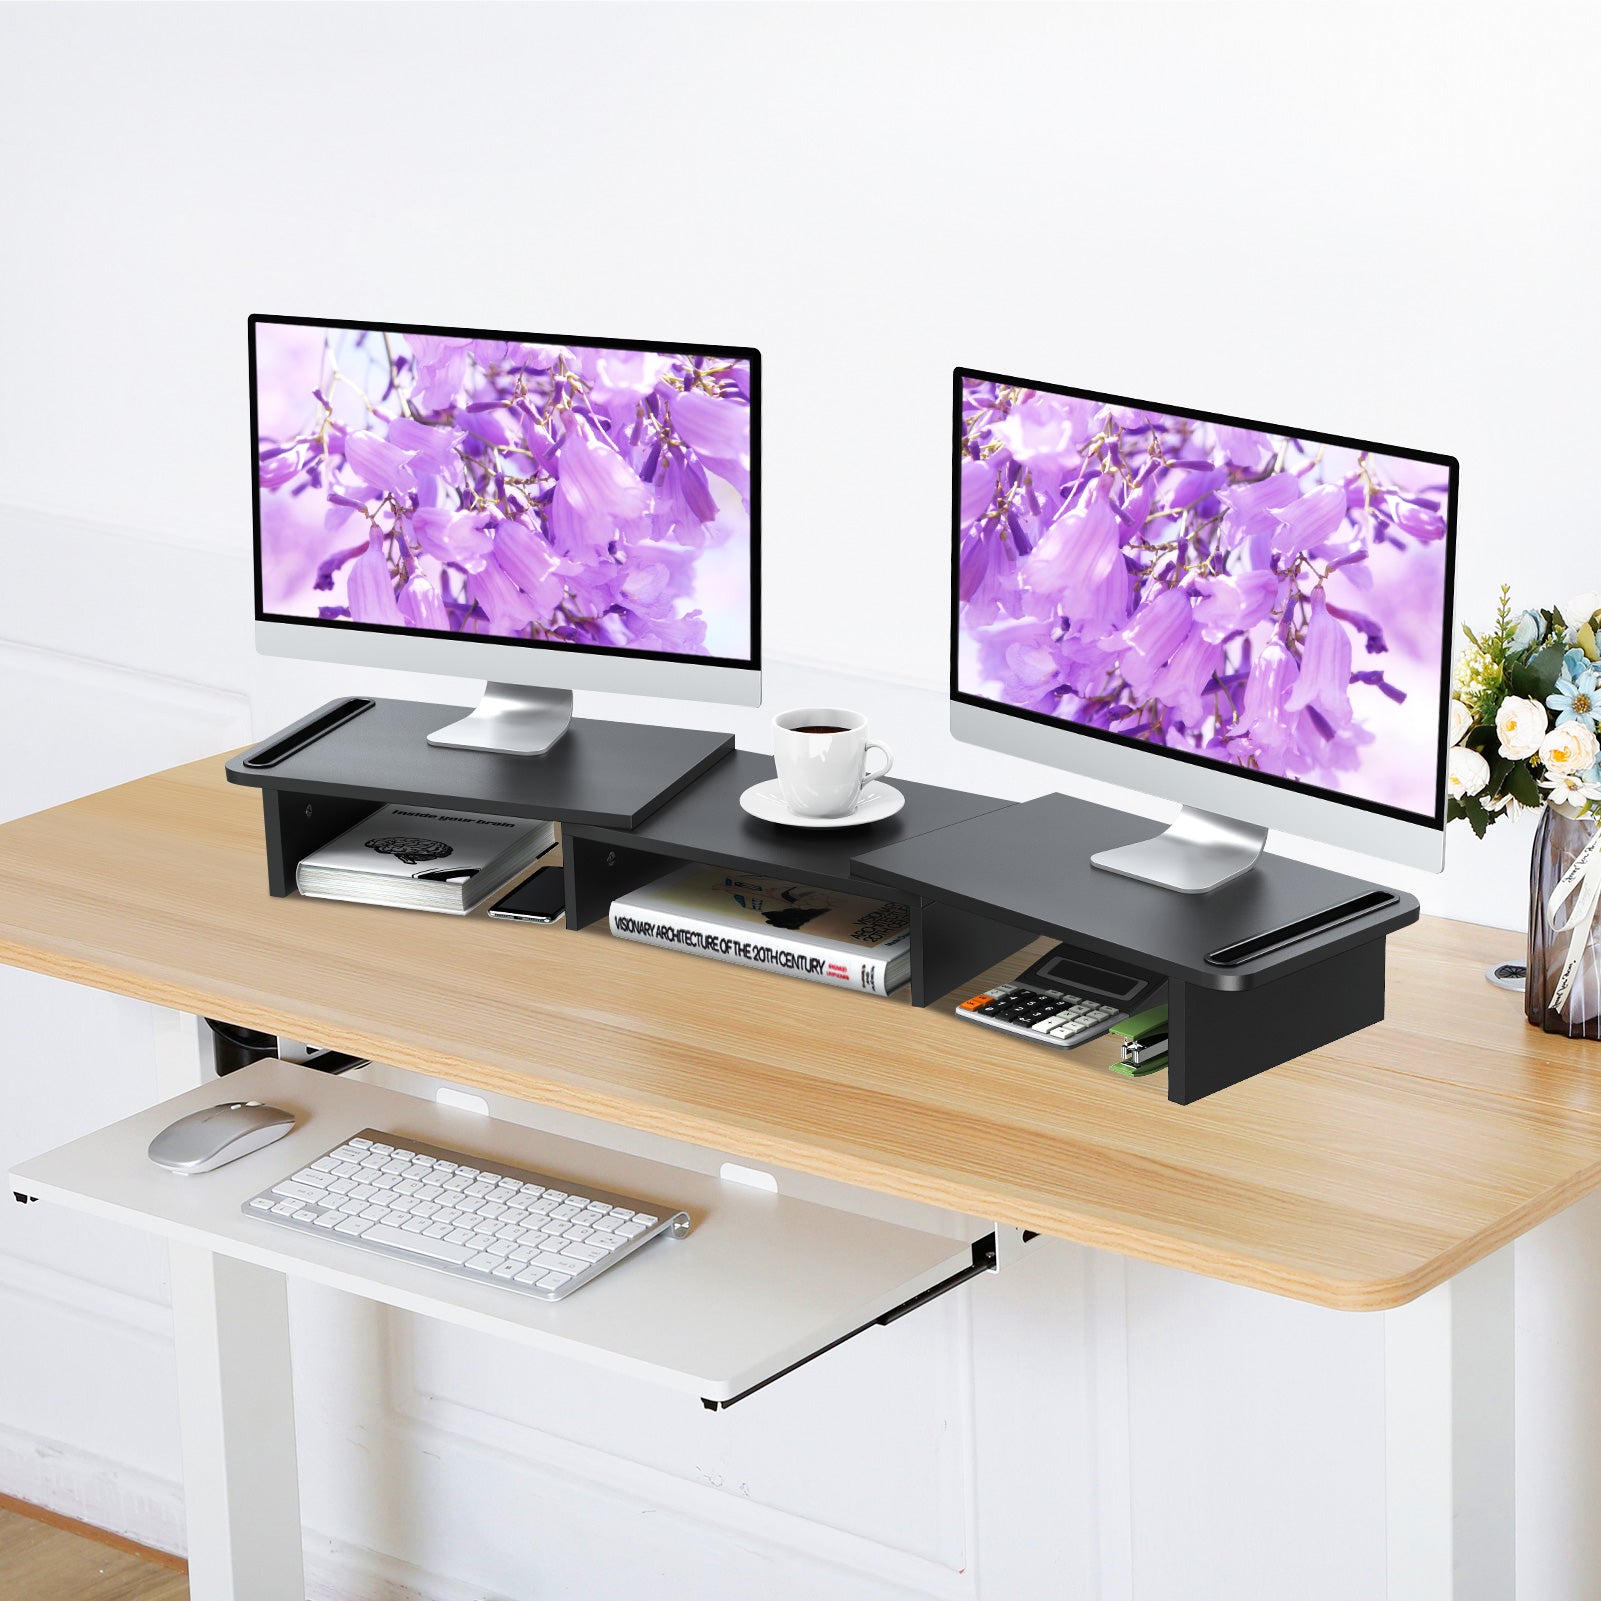 Black monitor stand riser for home office